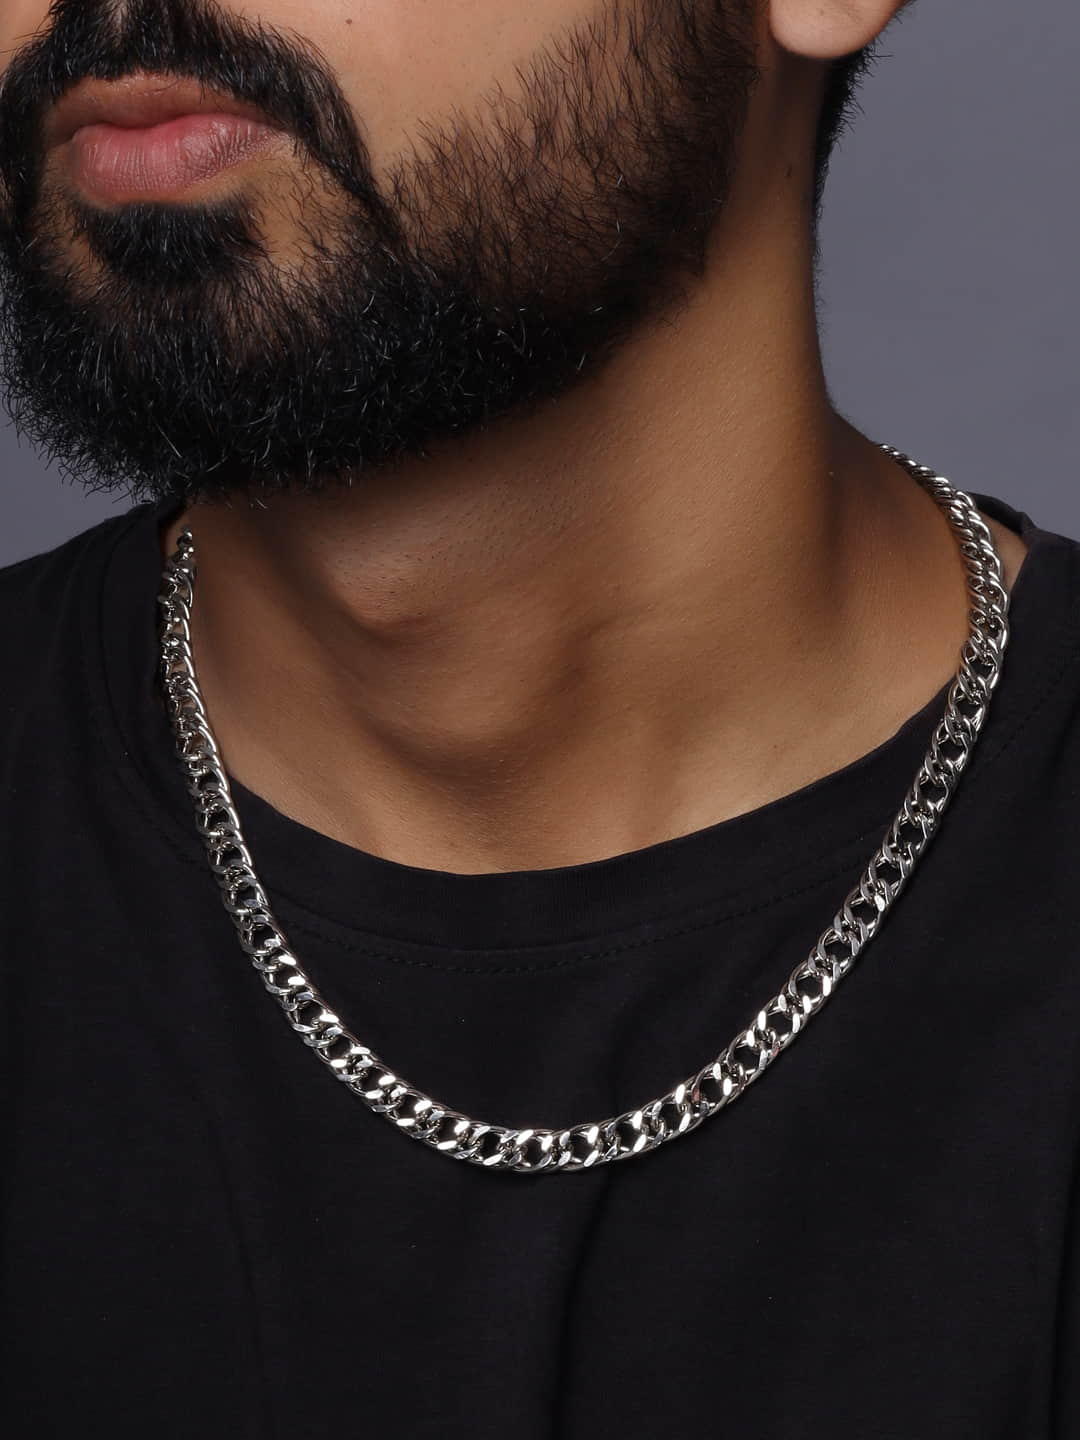 Silver Toned Minimal Chain For Boys